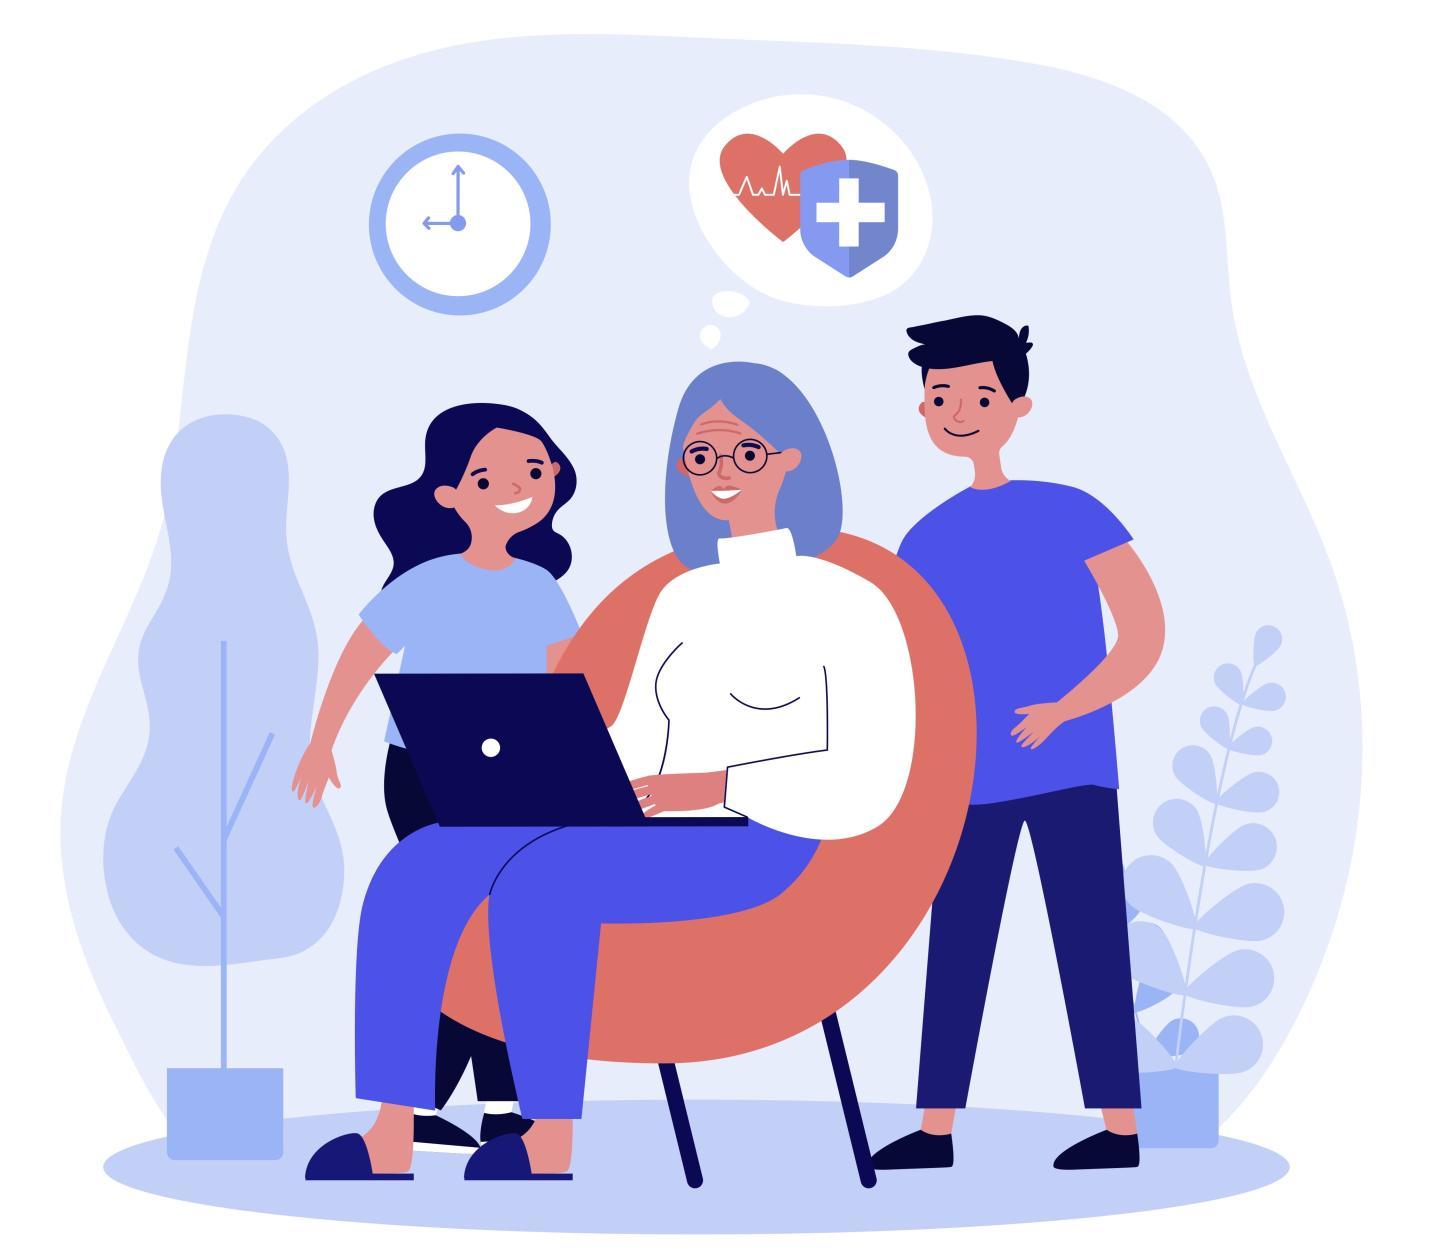 An illustration of an older woman and children reviewing heart health information